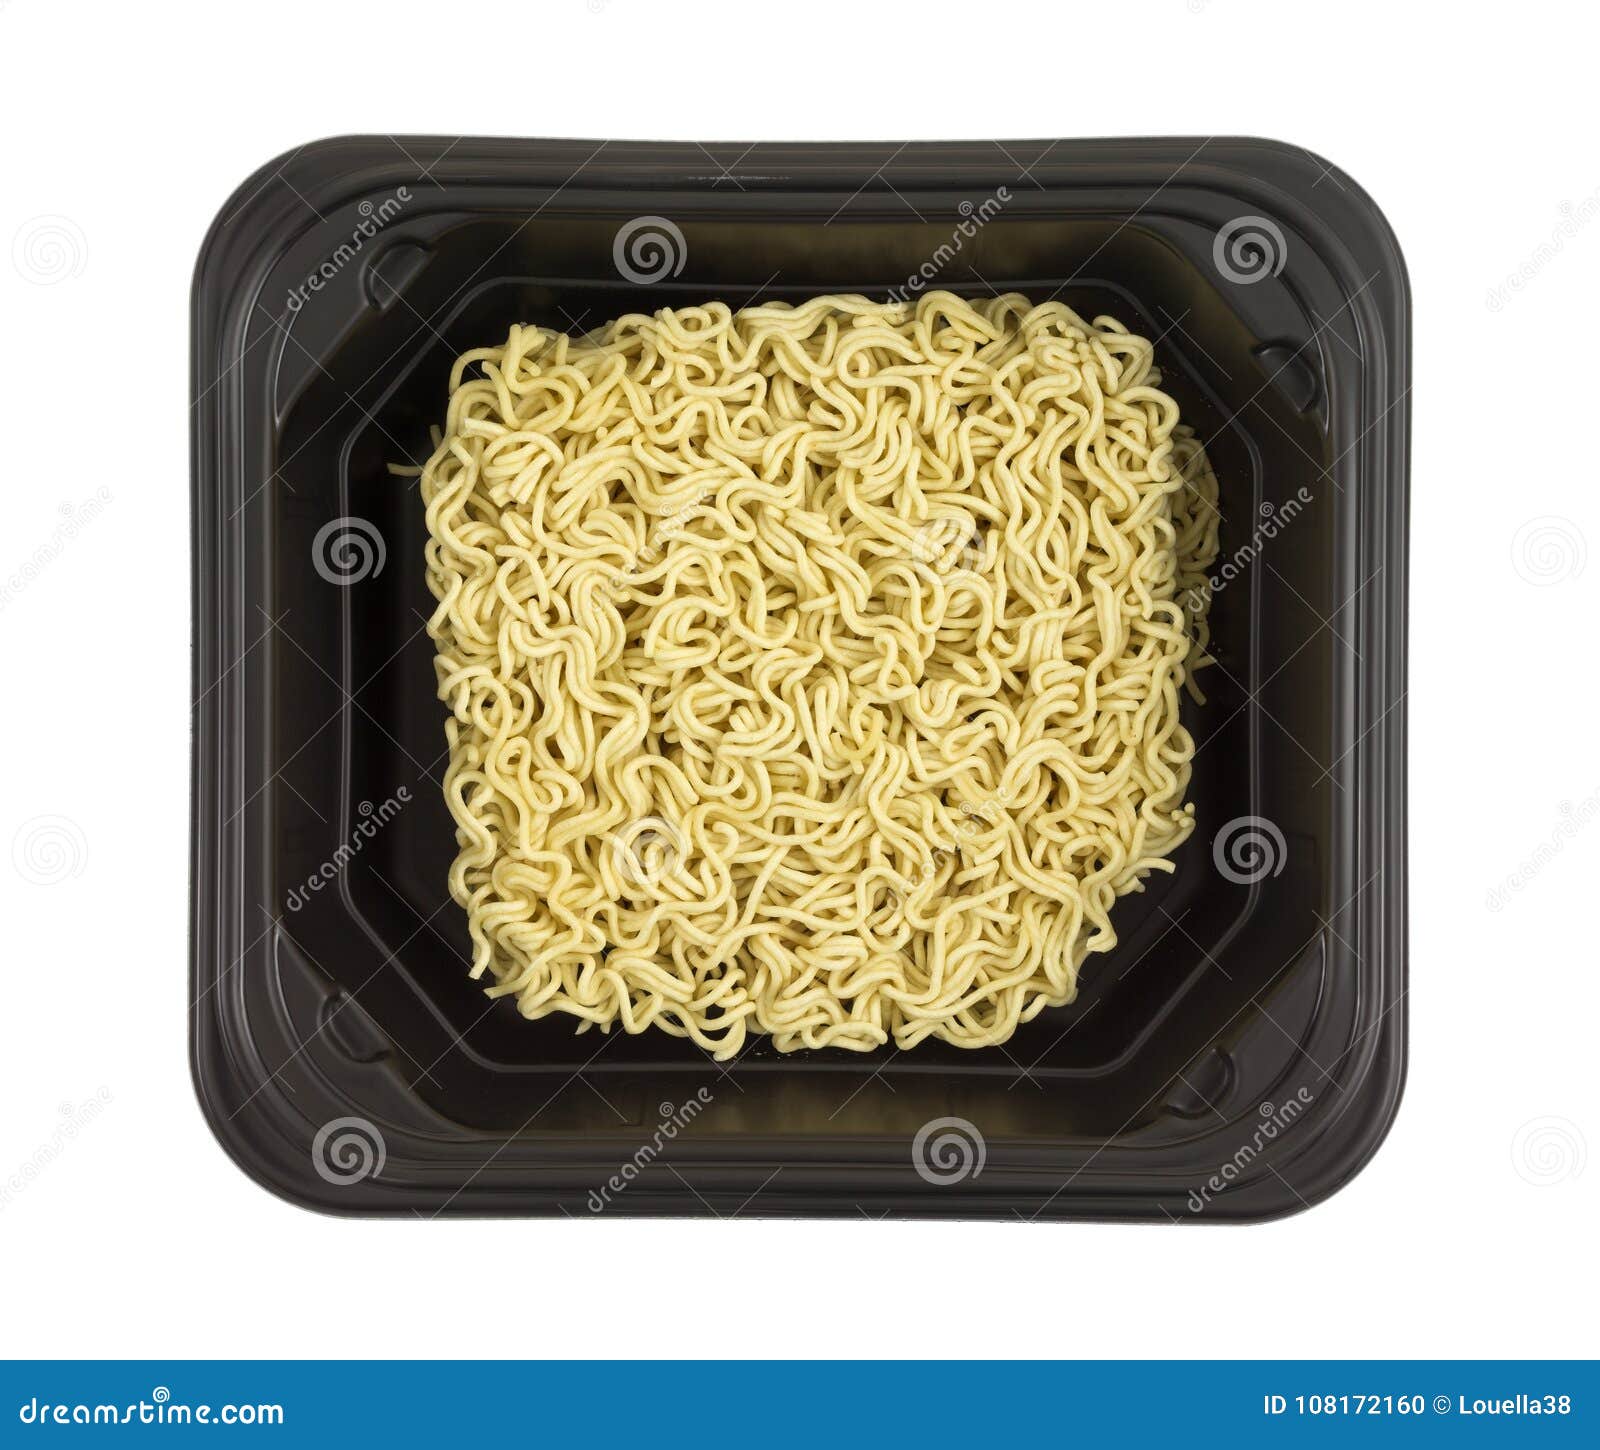 3 385 Uncooked Ramen Photos Free Royalty Free Stock Photos From Dreamstime